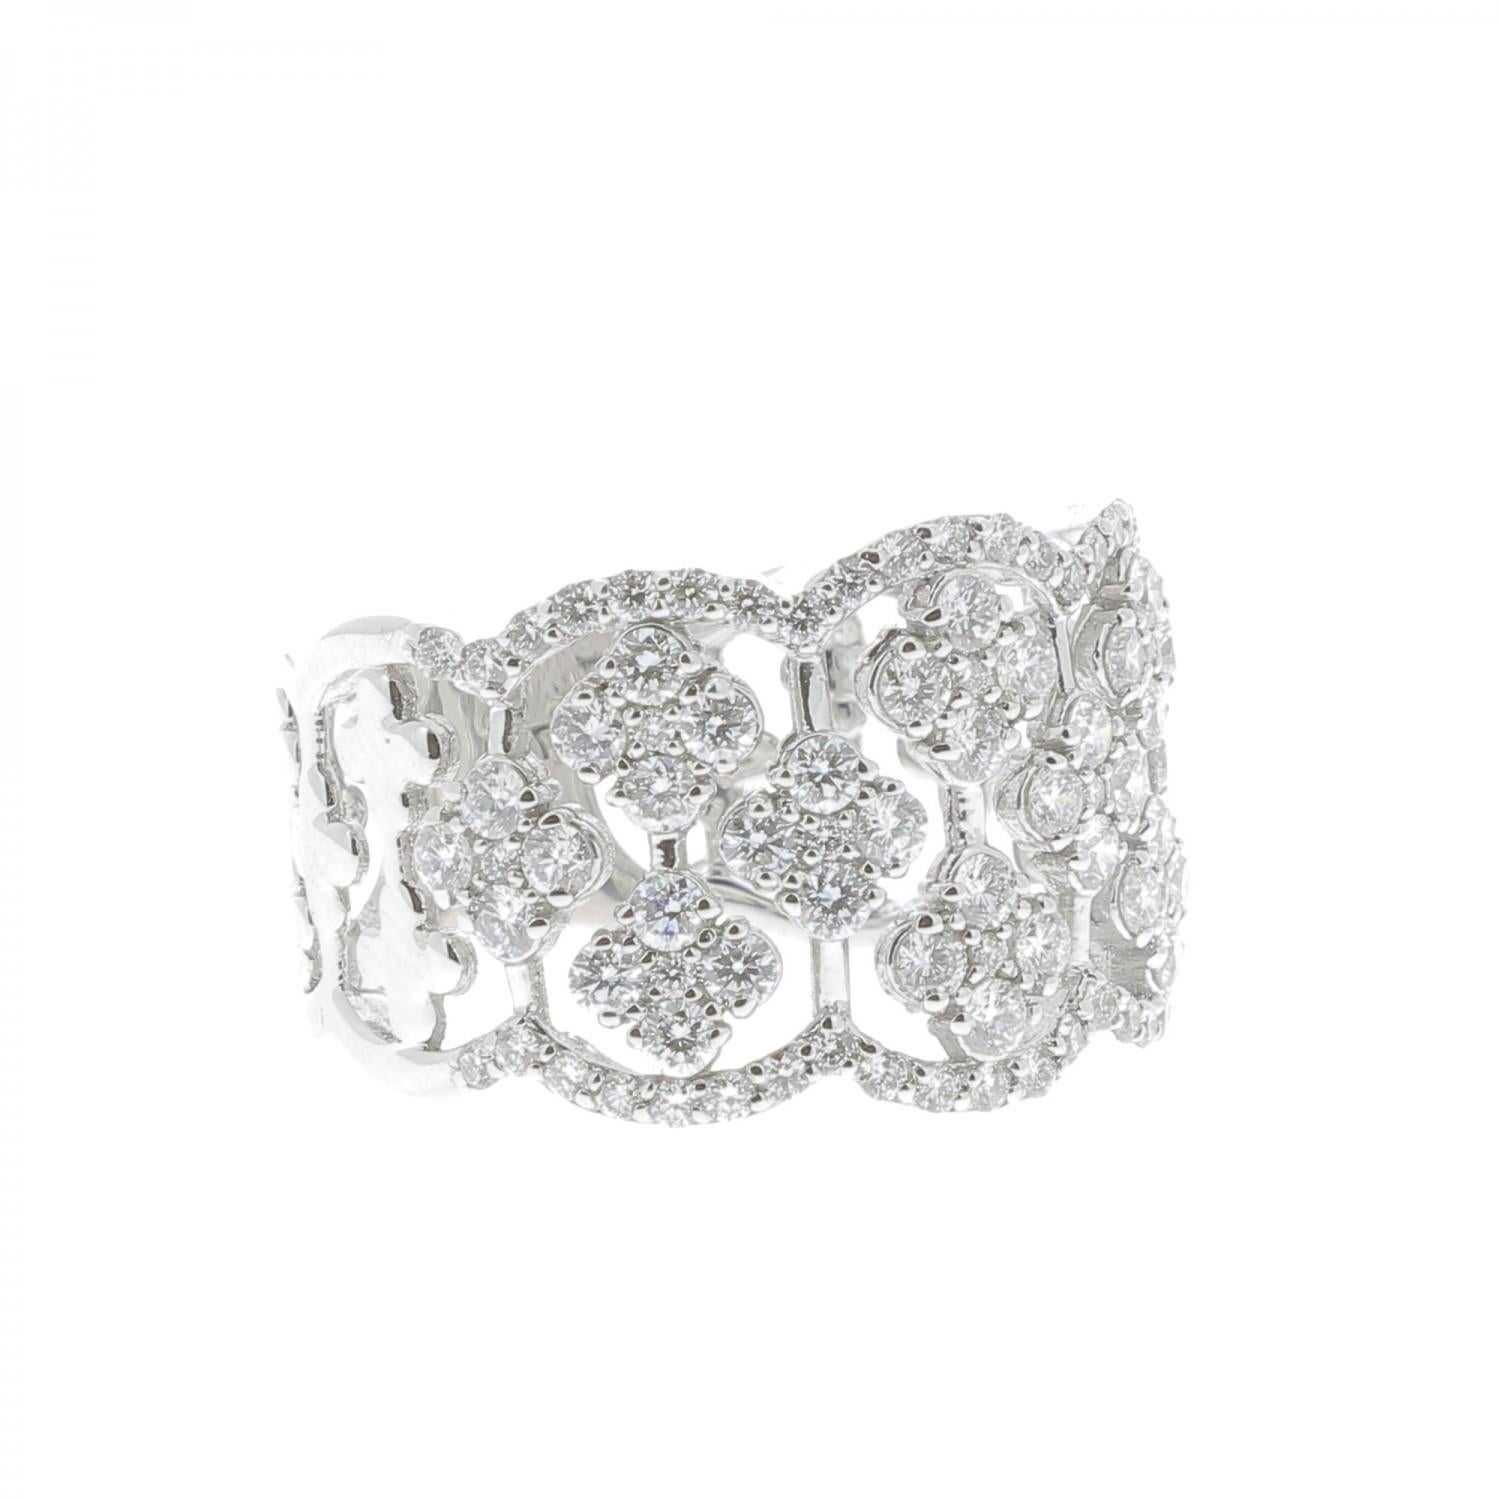 The Clover Ring is a unique and trendy ring set with 1.42 carat.
The ring is paved with clover set with brilliants cut diamonds.
The Ring is in 18K White Gold.
The Diamonds are GVS quality.
The ring size is 6 ½ US and can be size.